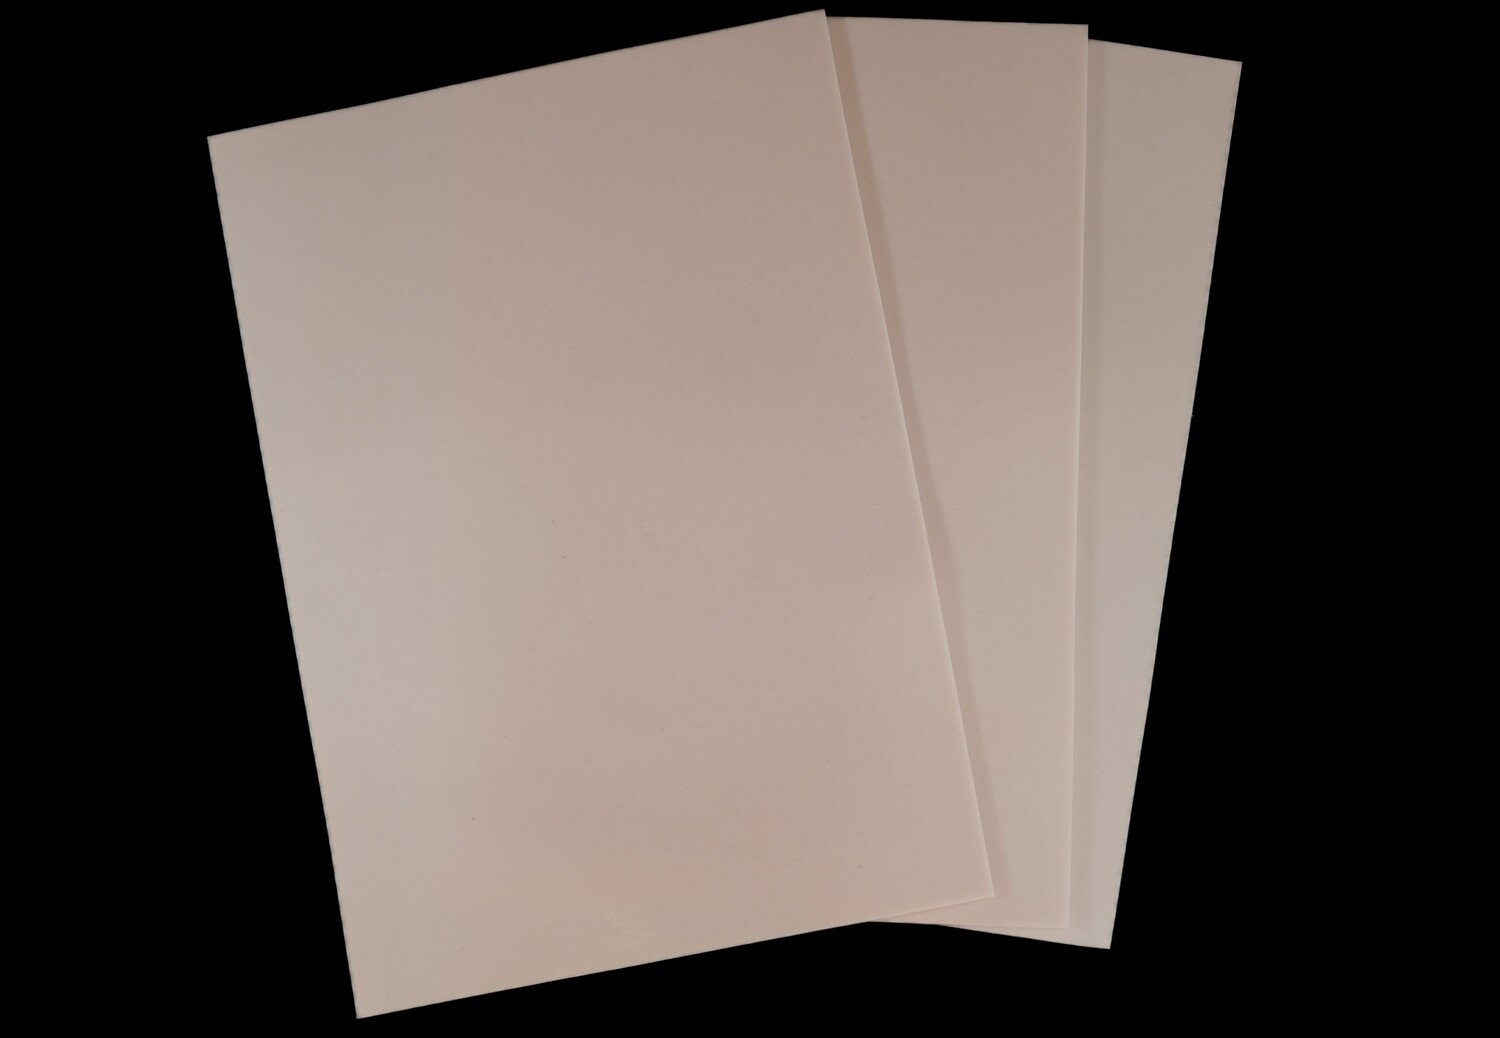 3 x A4 Reelskin sheet £32.99 (discount codes not applicable to this offer)